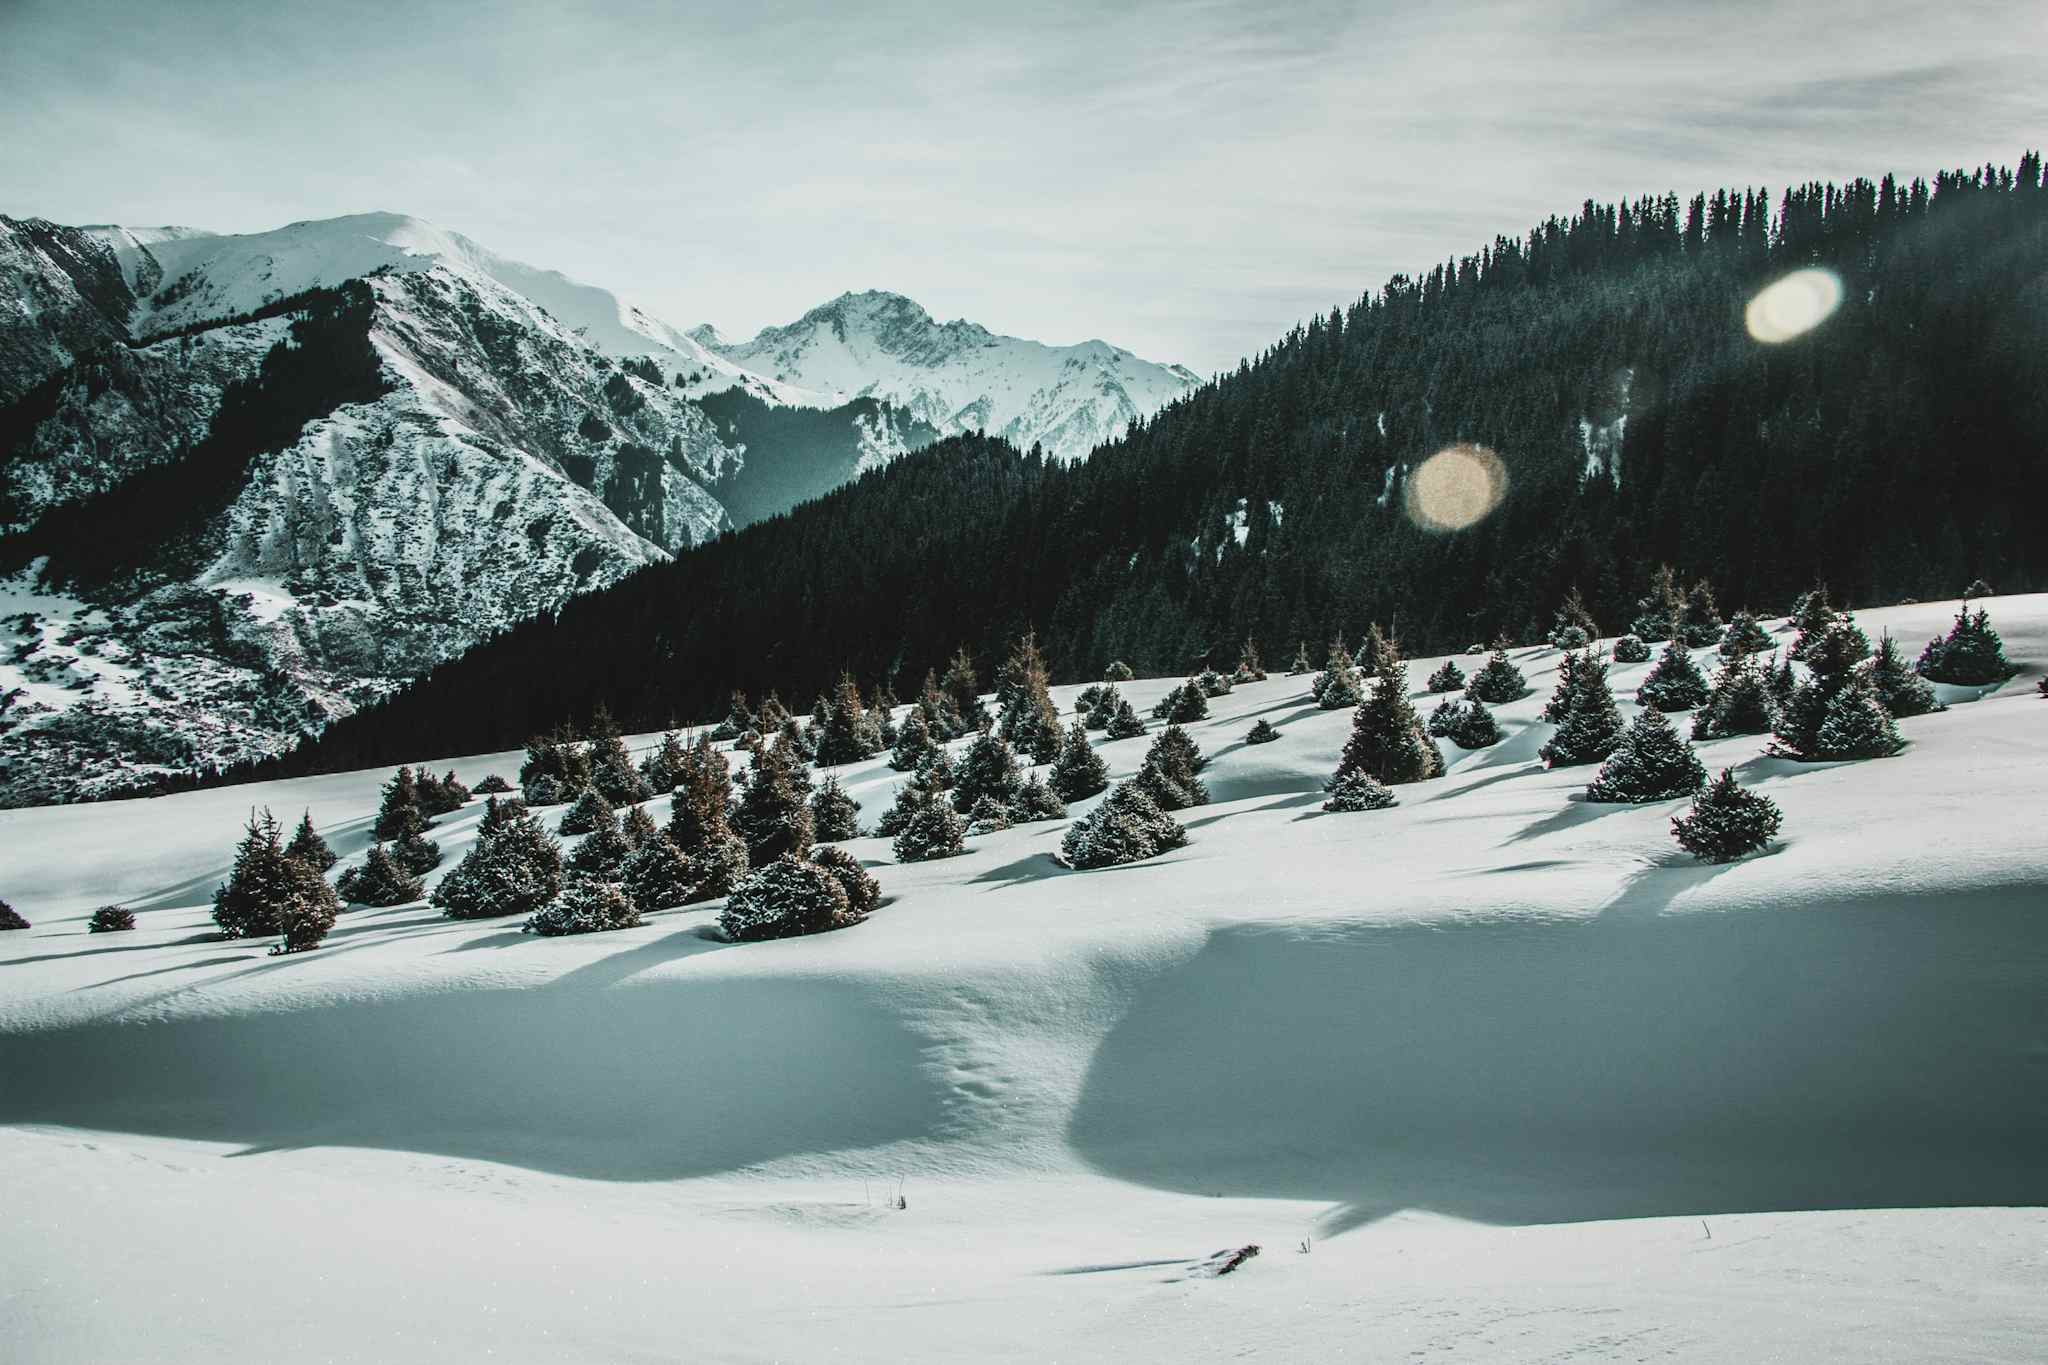 View of the snowy Kyrgyzstan mountains with pine forest in front